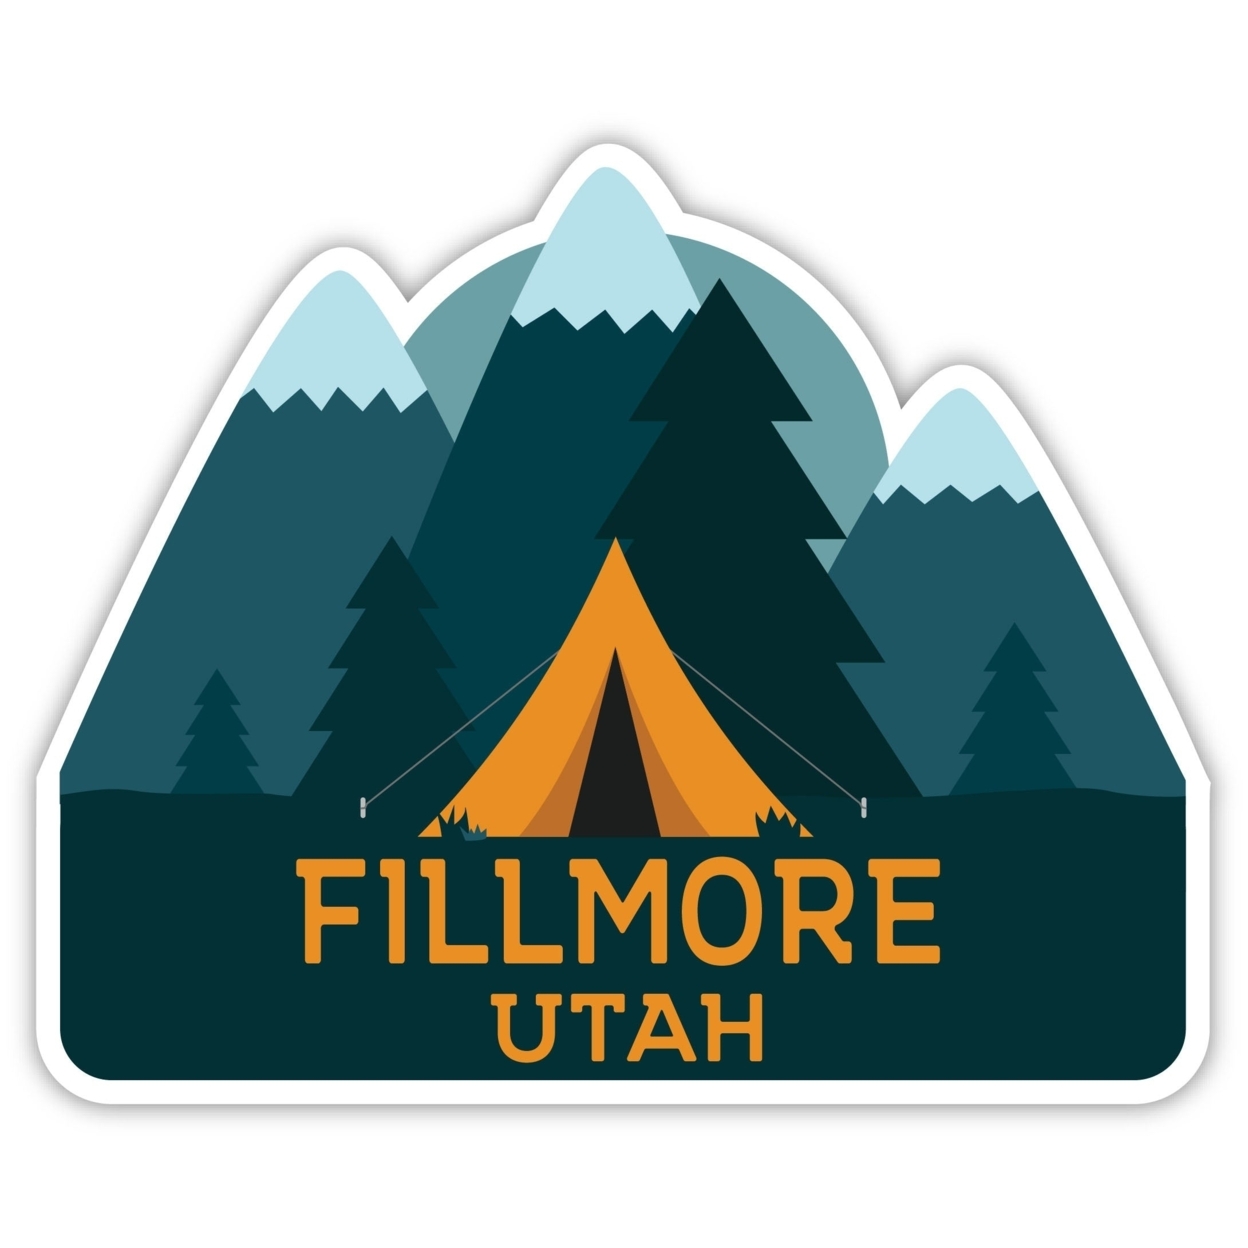 Fillmore Utah Souvenir Decorative Stickers (Choose Theme And Size) - 4-Pack, 6-Inch, Tent